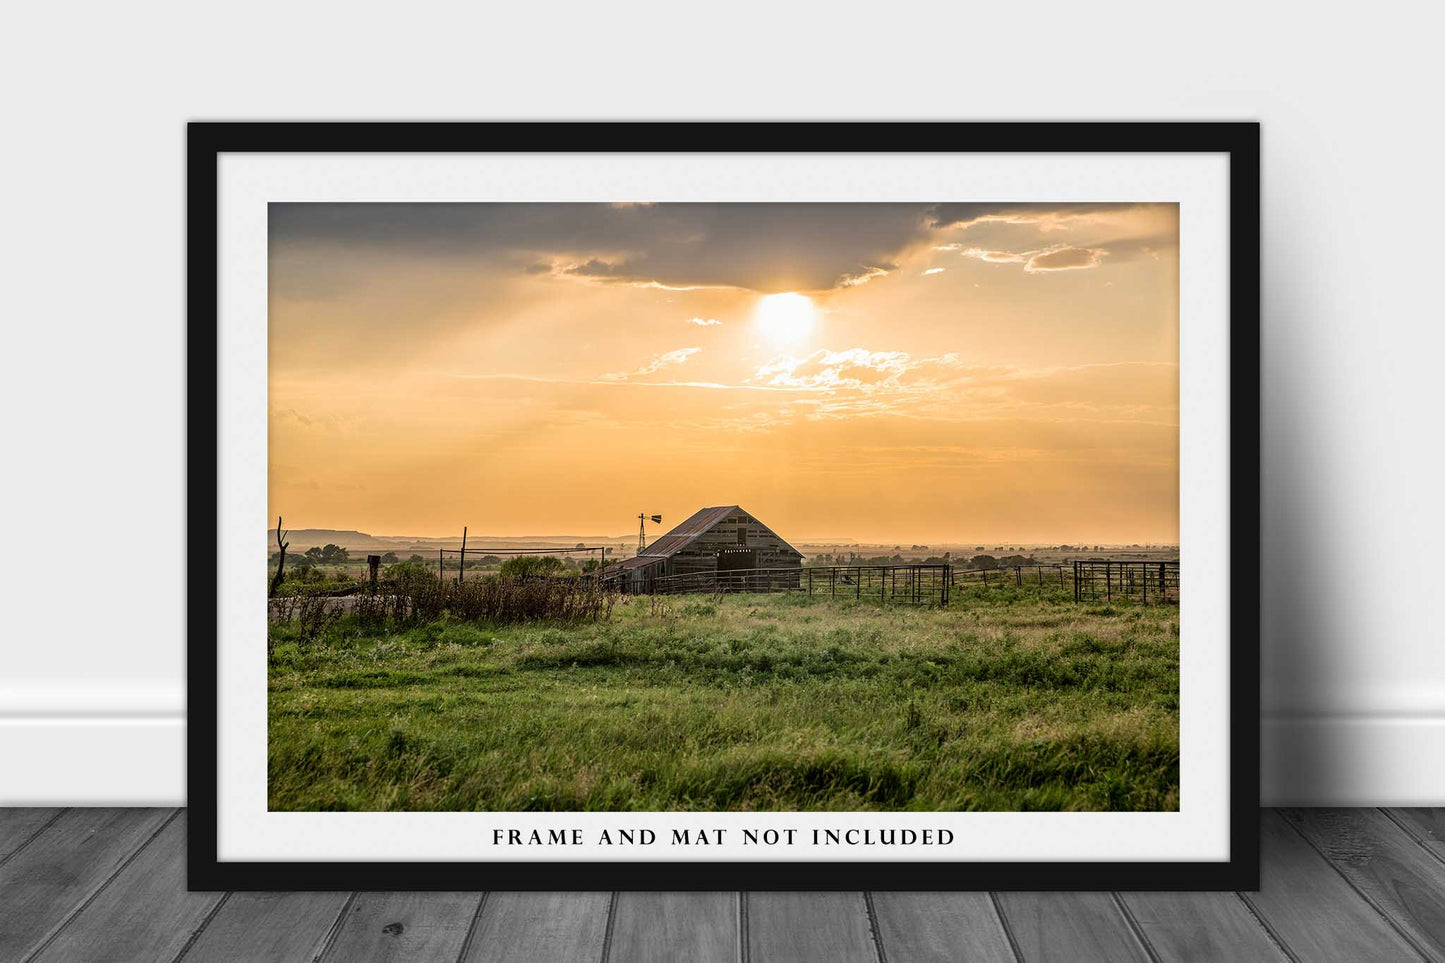 Country Picture - Fine Art Photography Print of Old Wooden Barn in Rural Oklahoma Rustic Farmhouse Artwork Wall Art Photo Decor